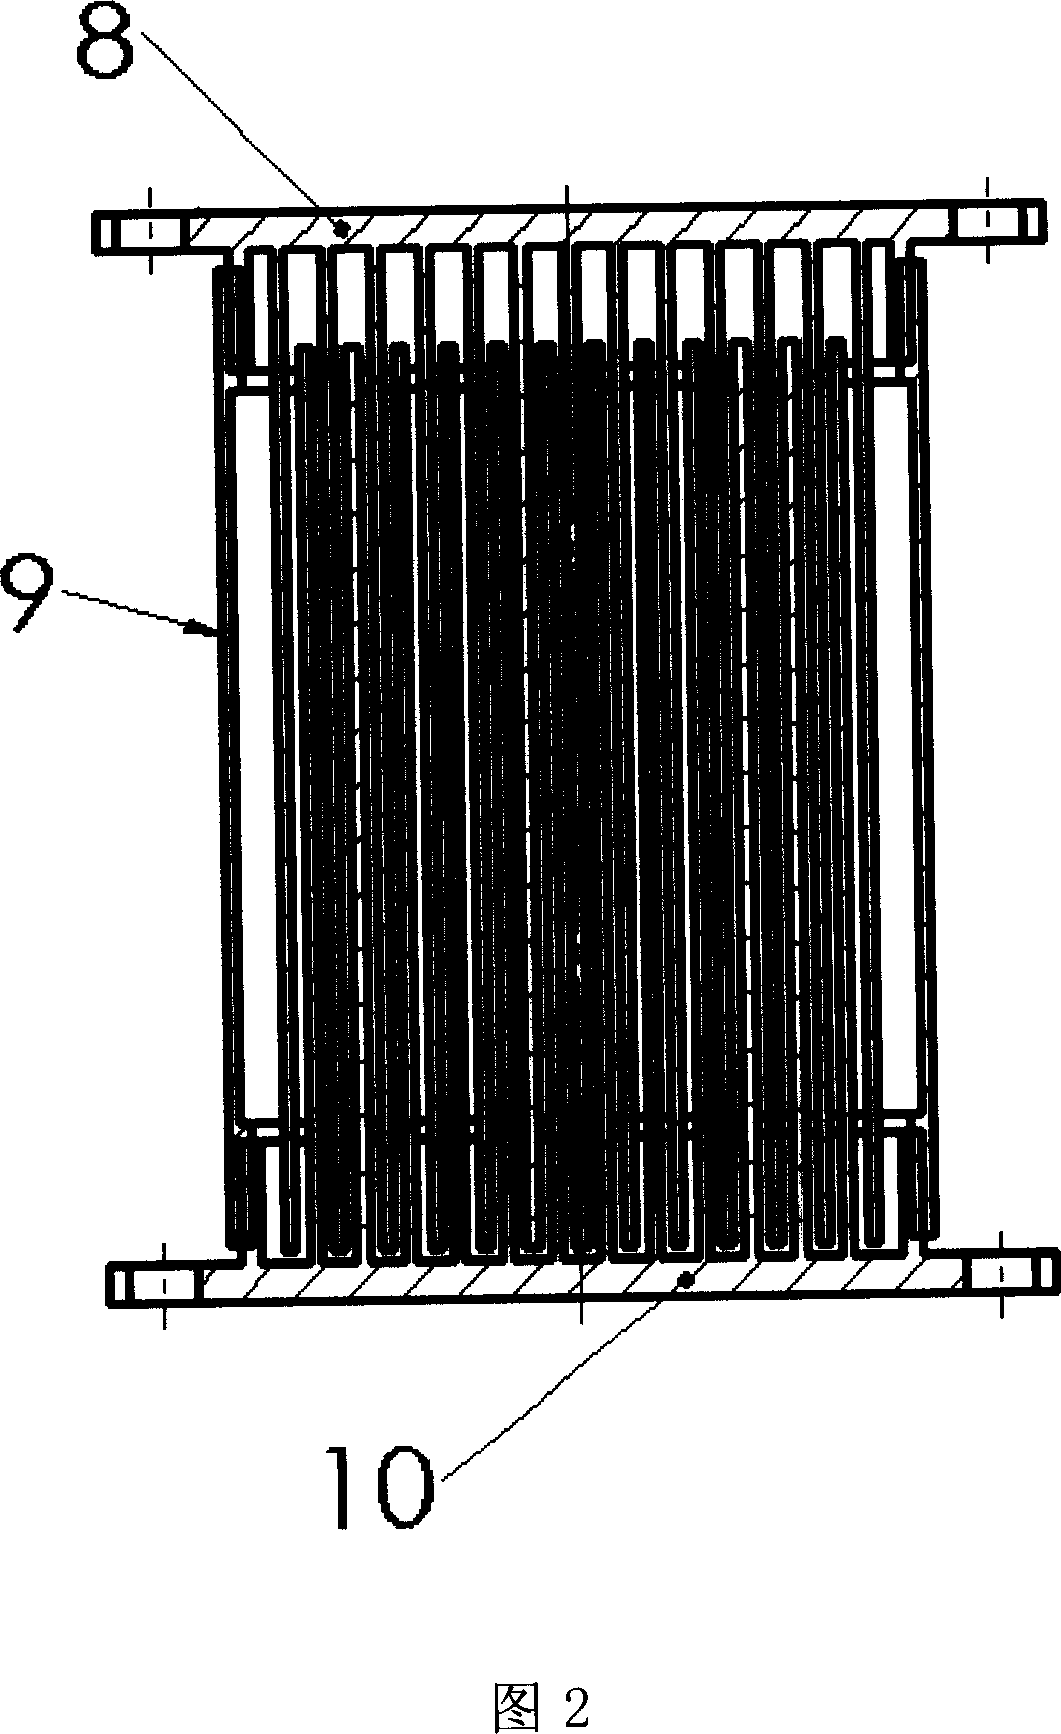 Thermal switch for conduction cooling superconducting magnet